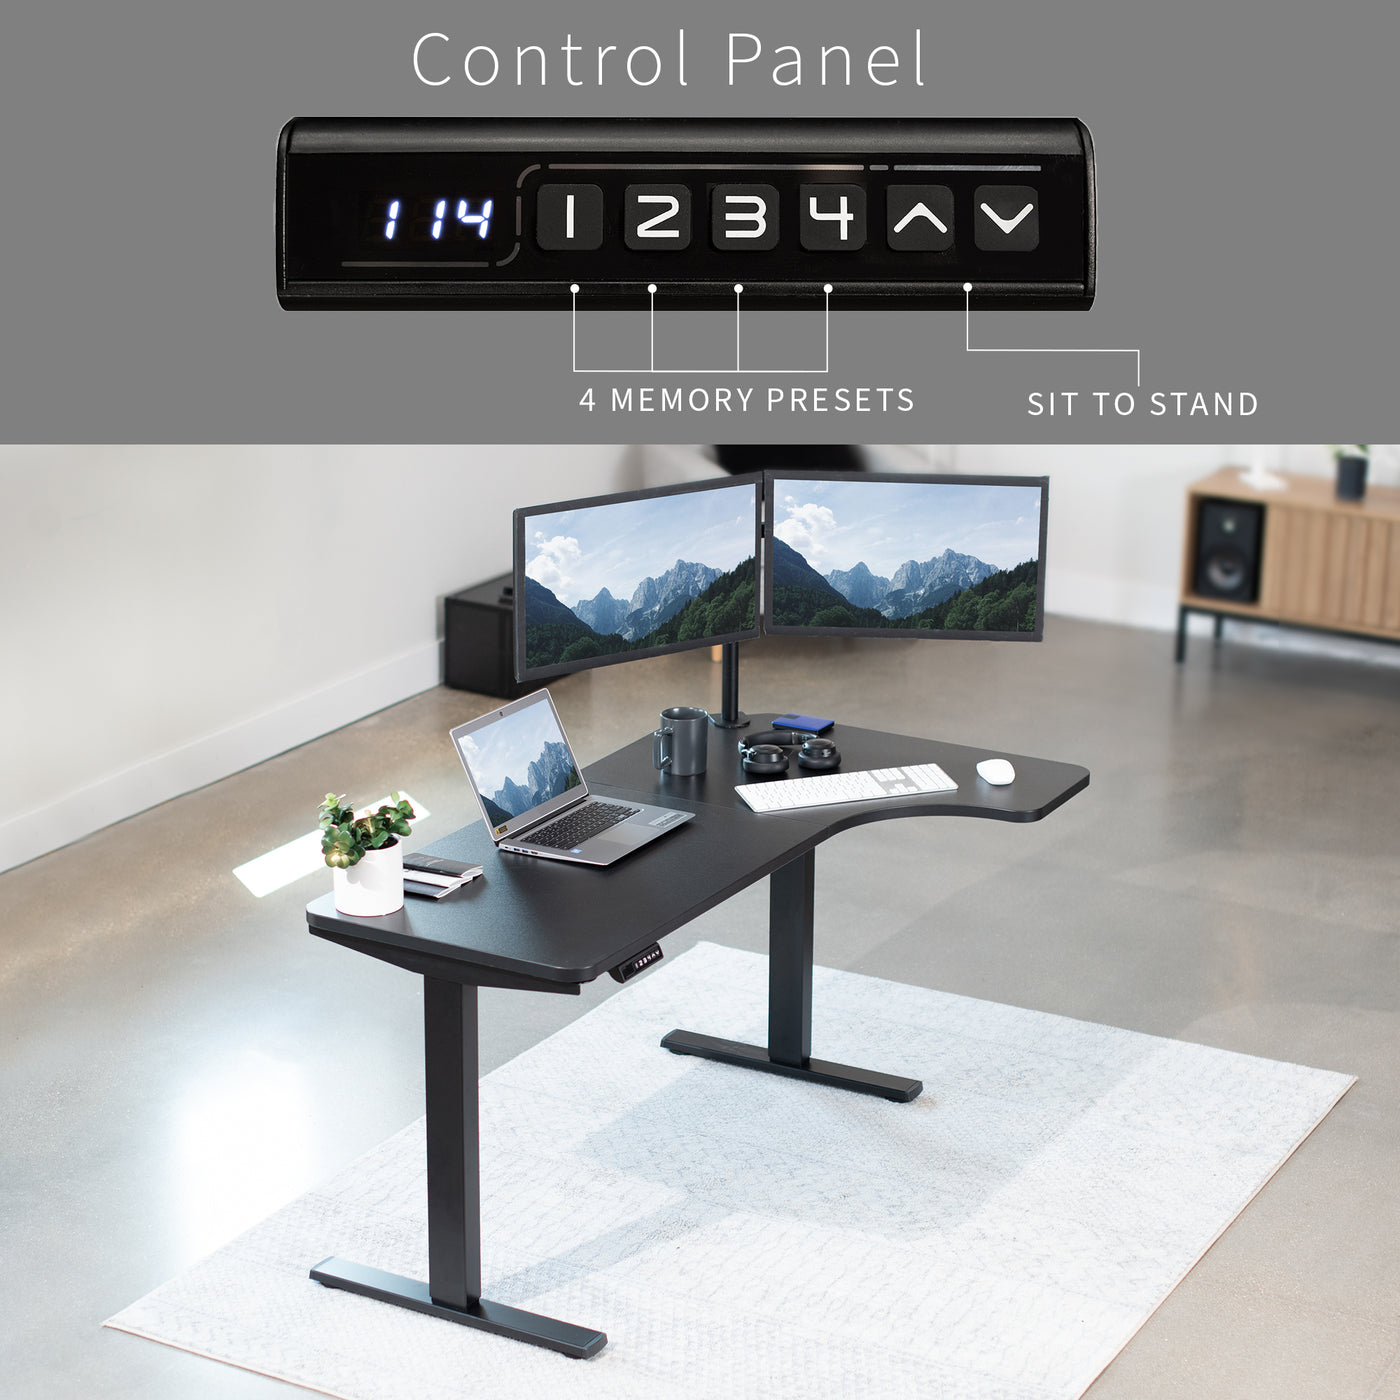 Dual monitor mount placed on the back edge curve of the desk for limitless setup styles.